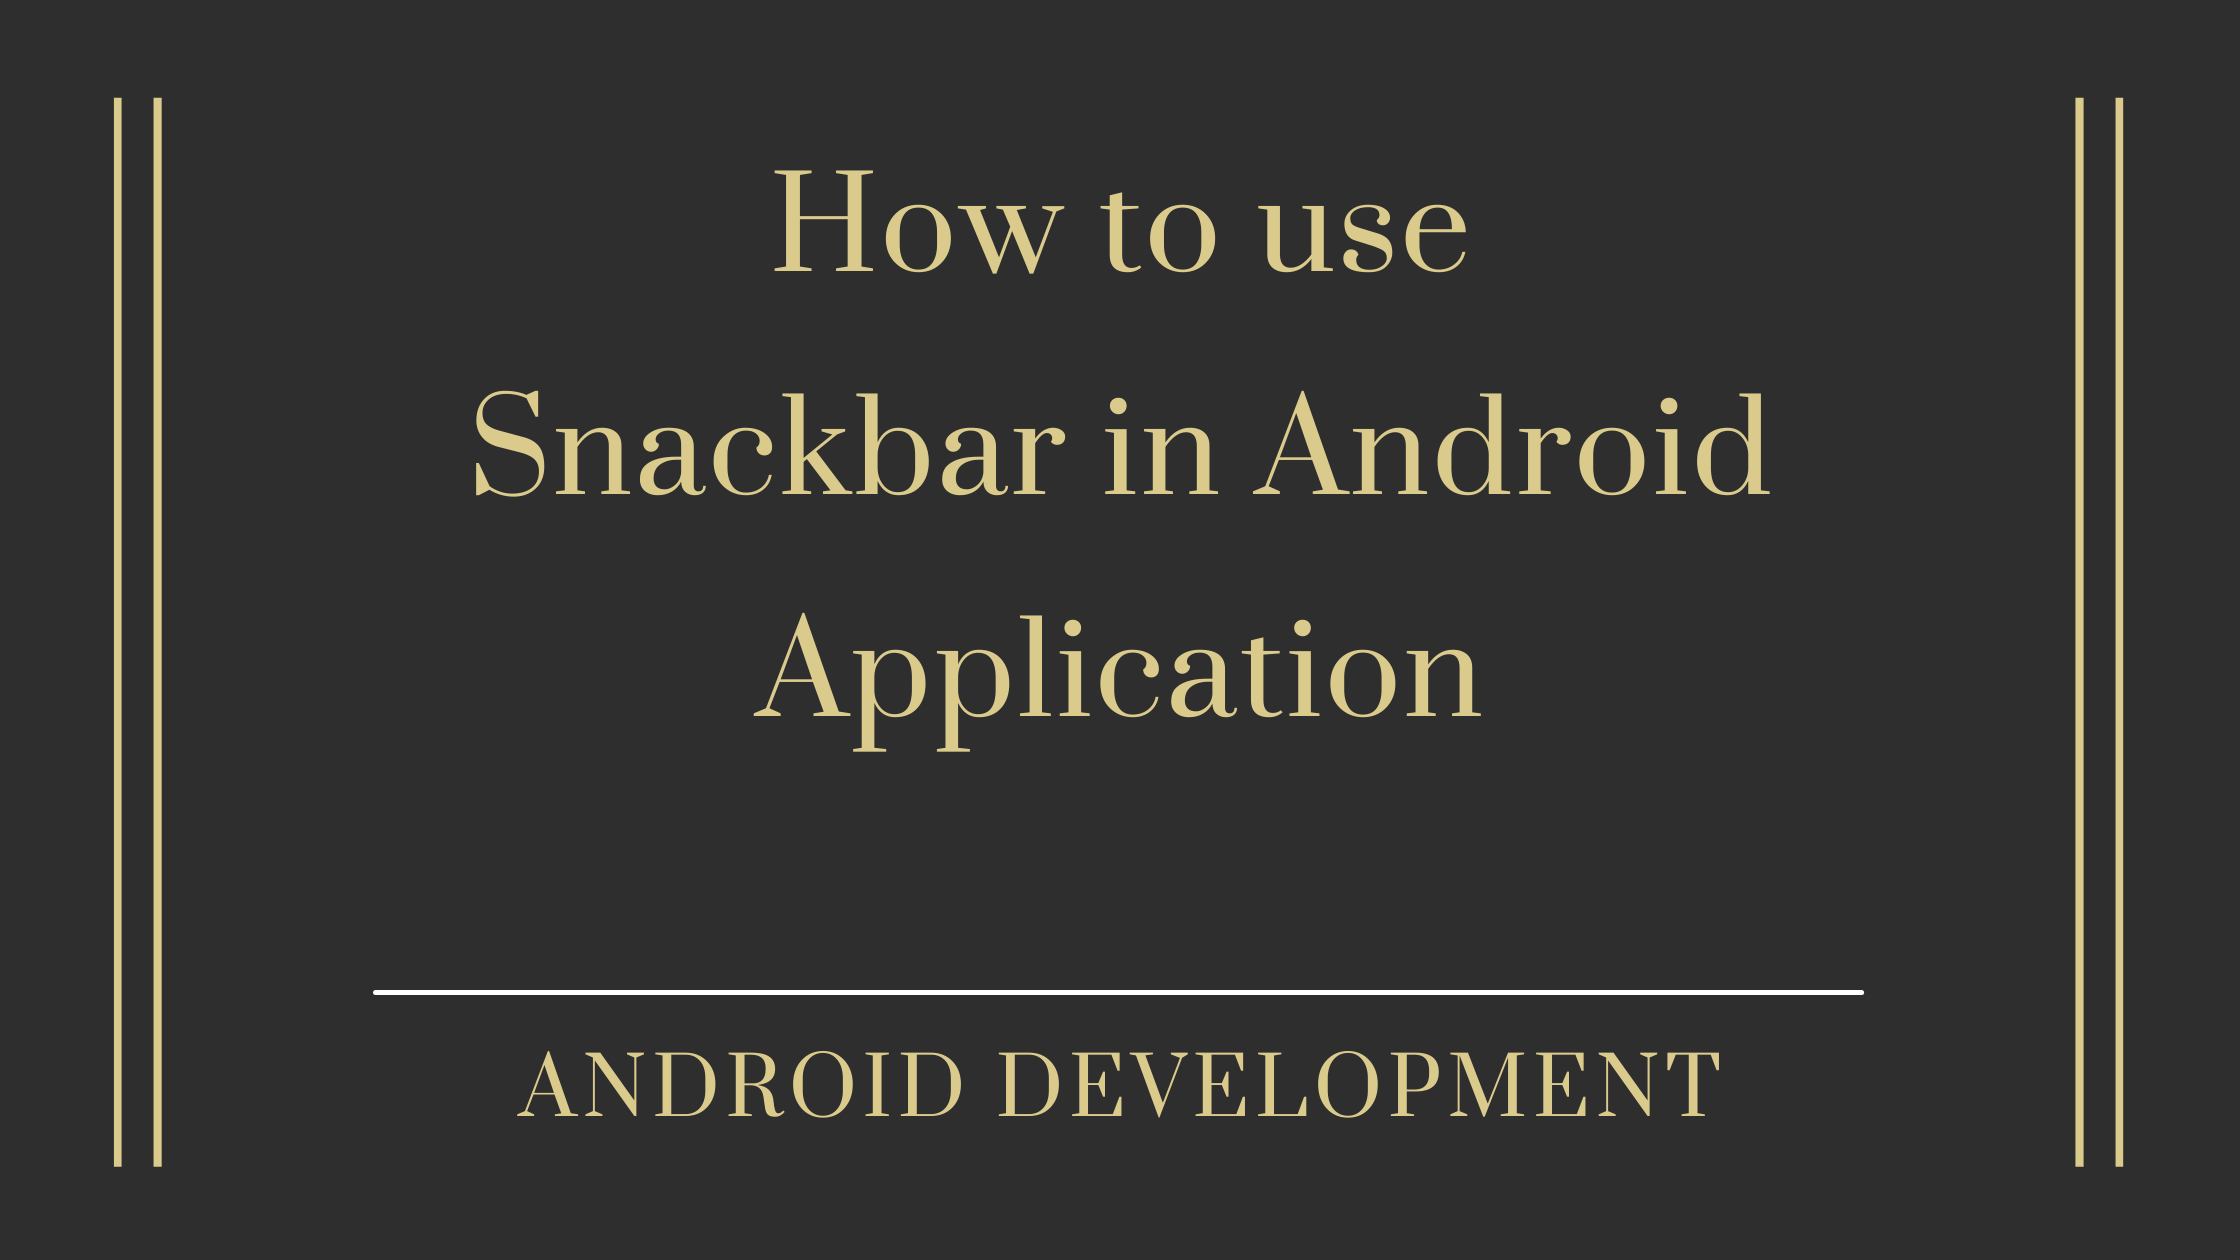 Snackbar in Android